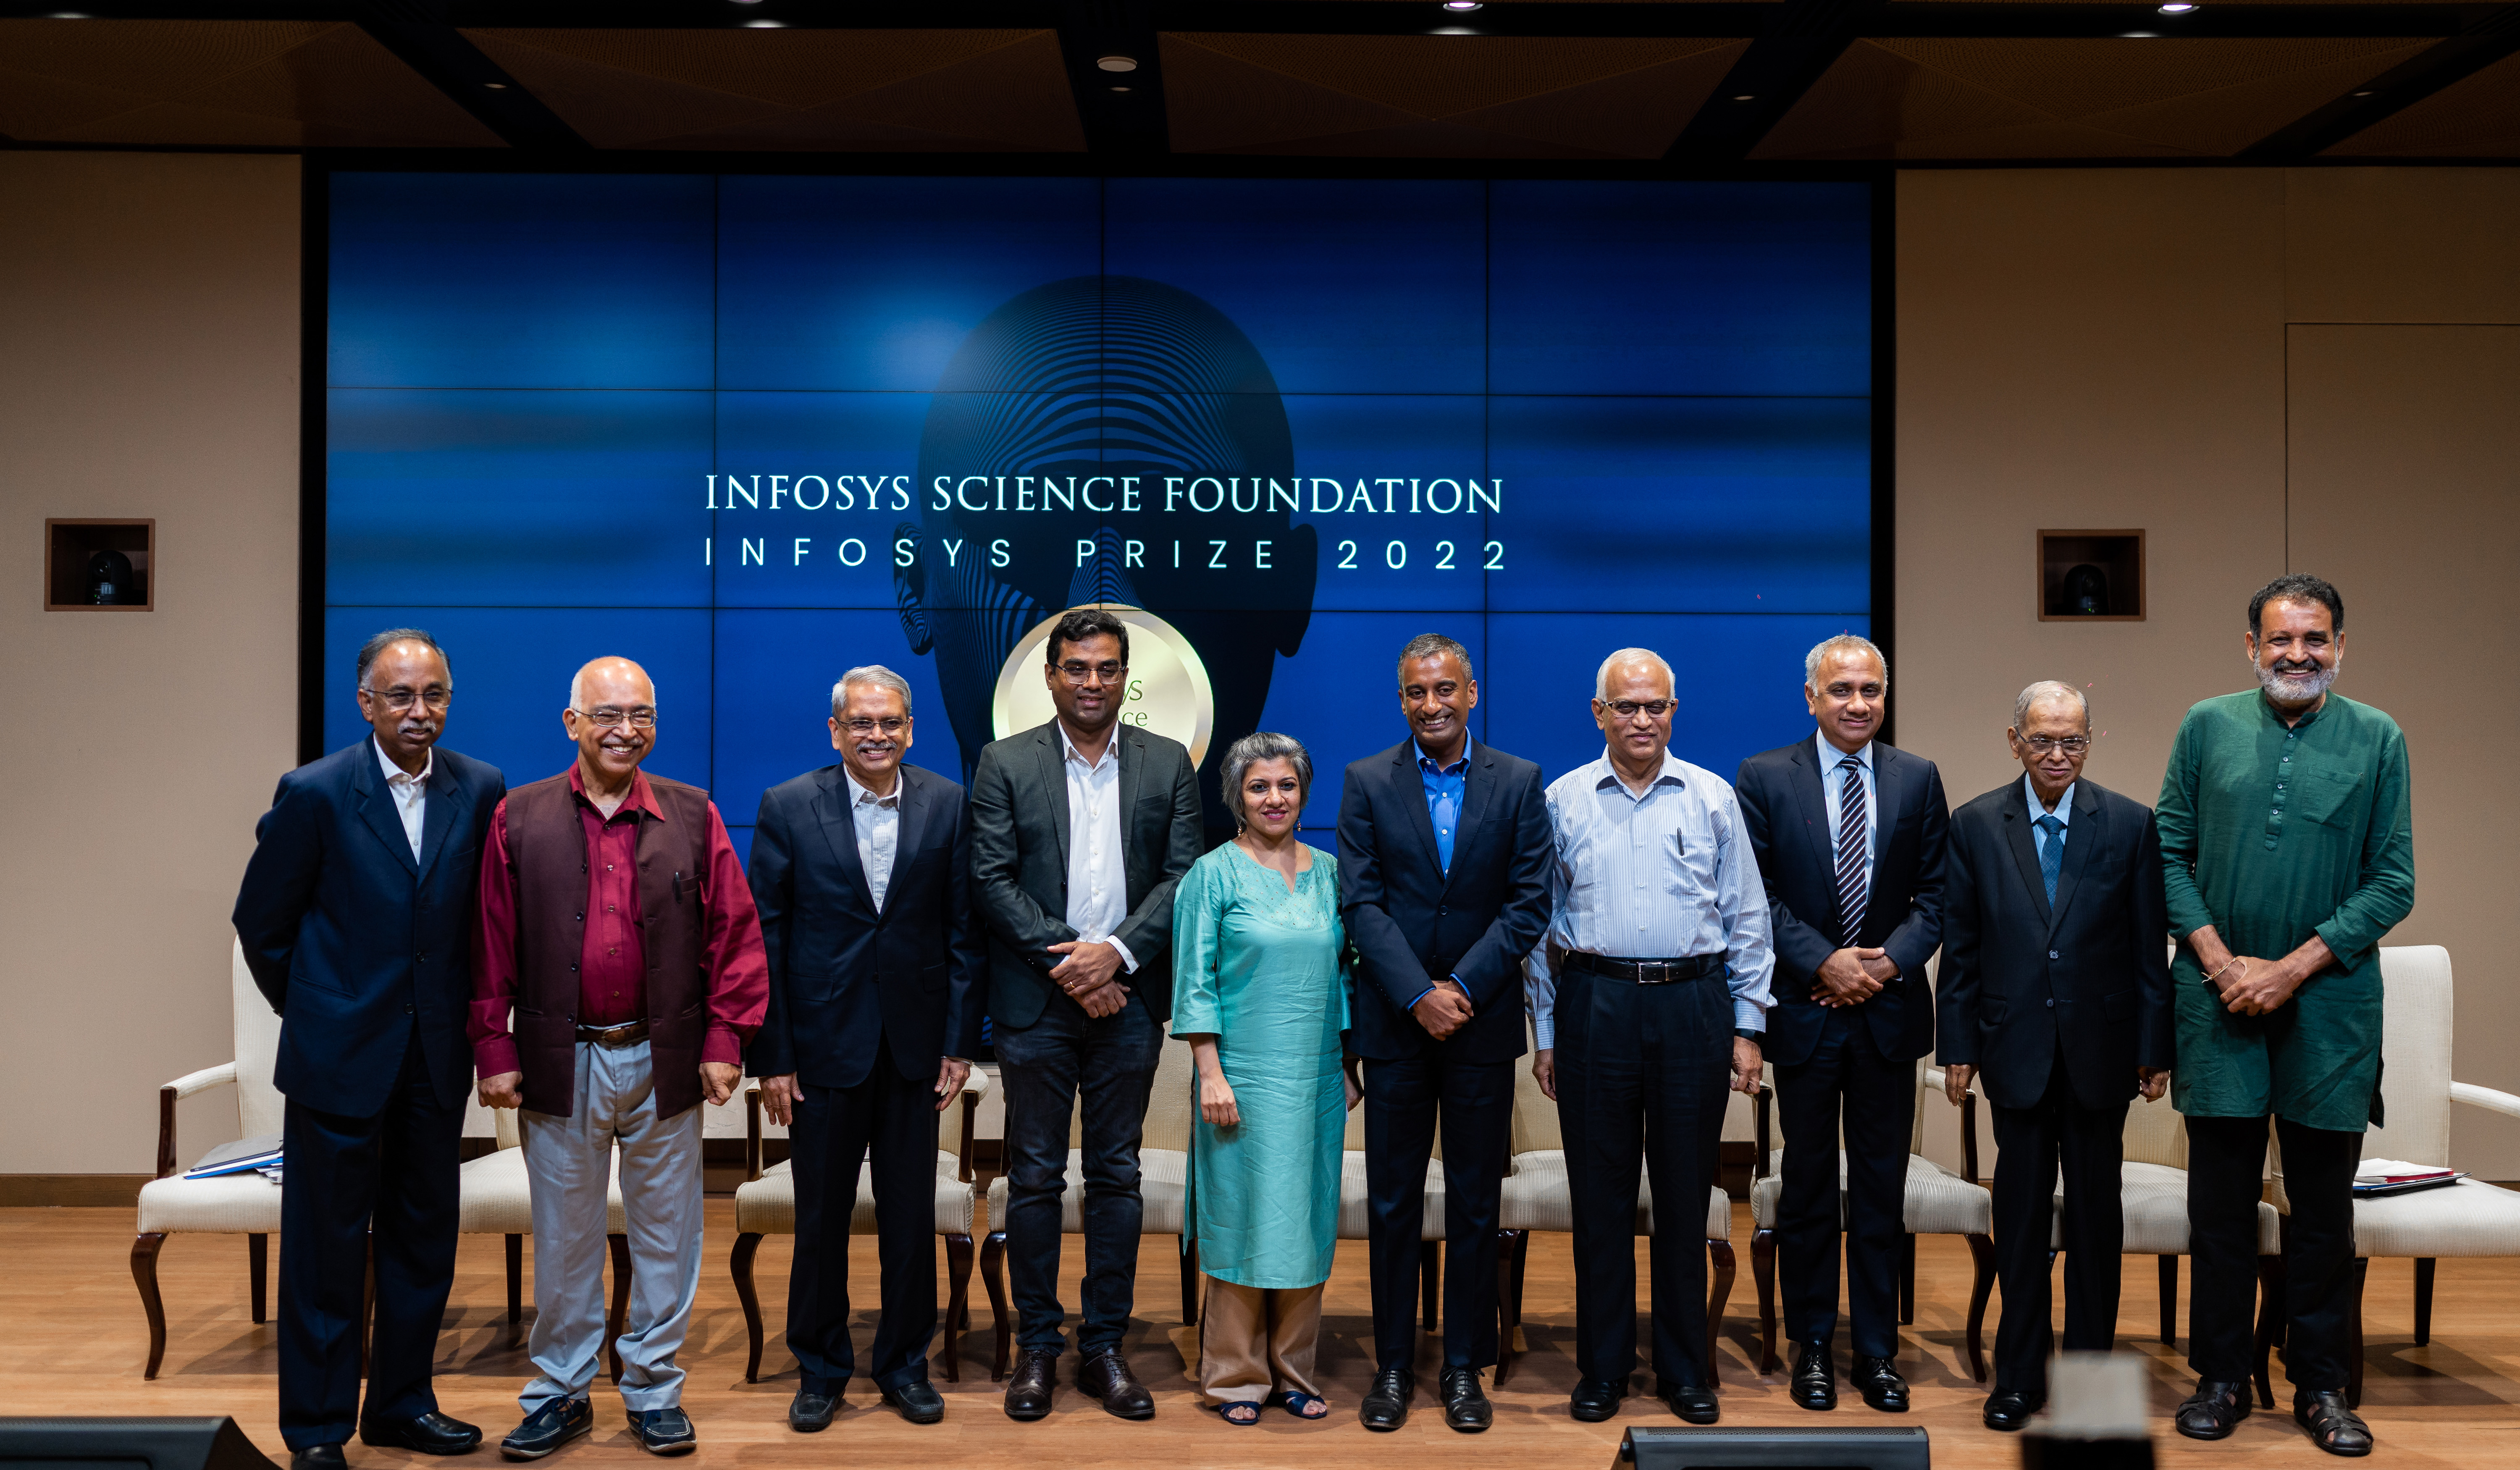 The Board of Trustees of the Infosys Science Foundation with the 2022 Infosys Prize laureates, Mahesh Kakde, and Sudhir Krishnaswamy